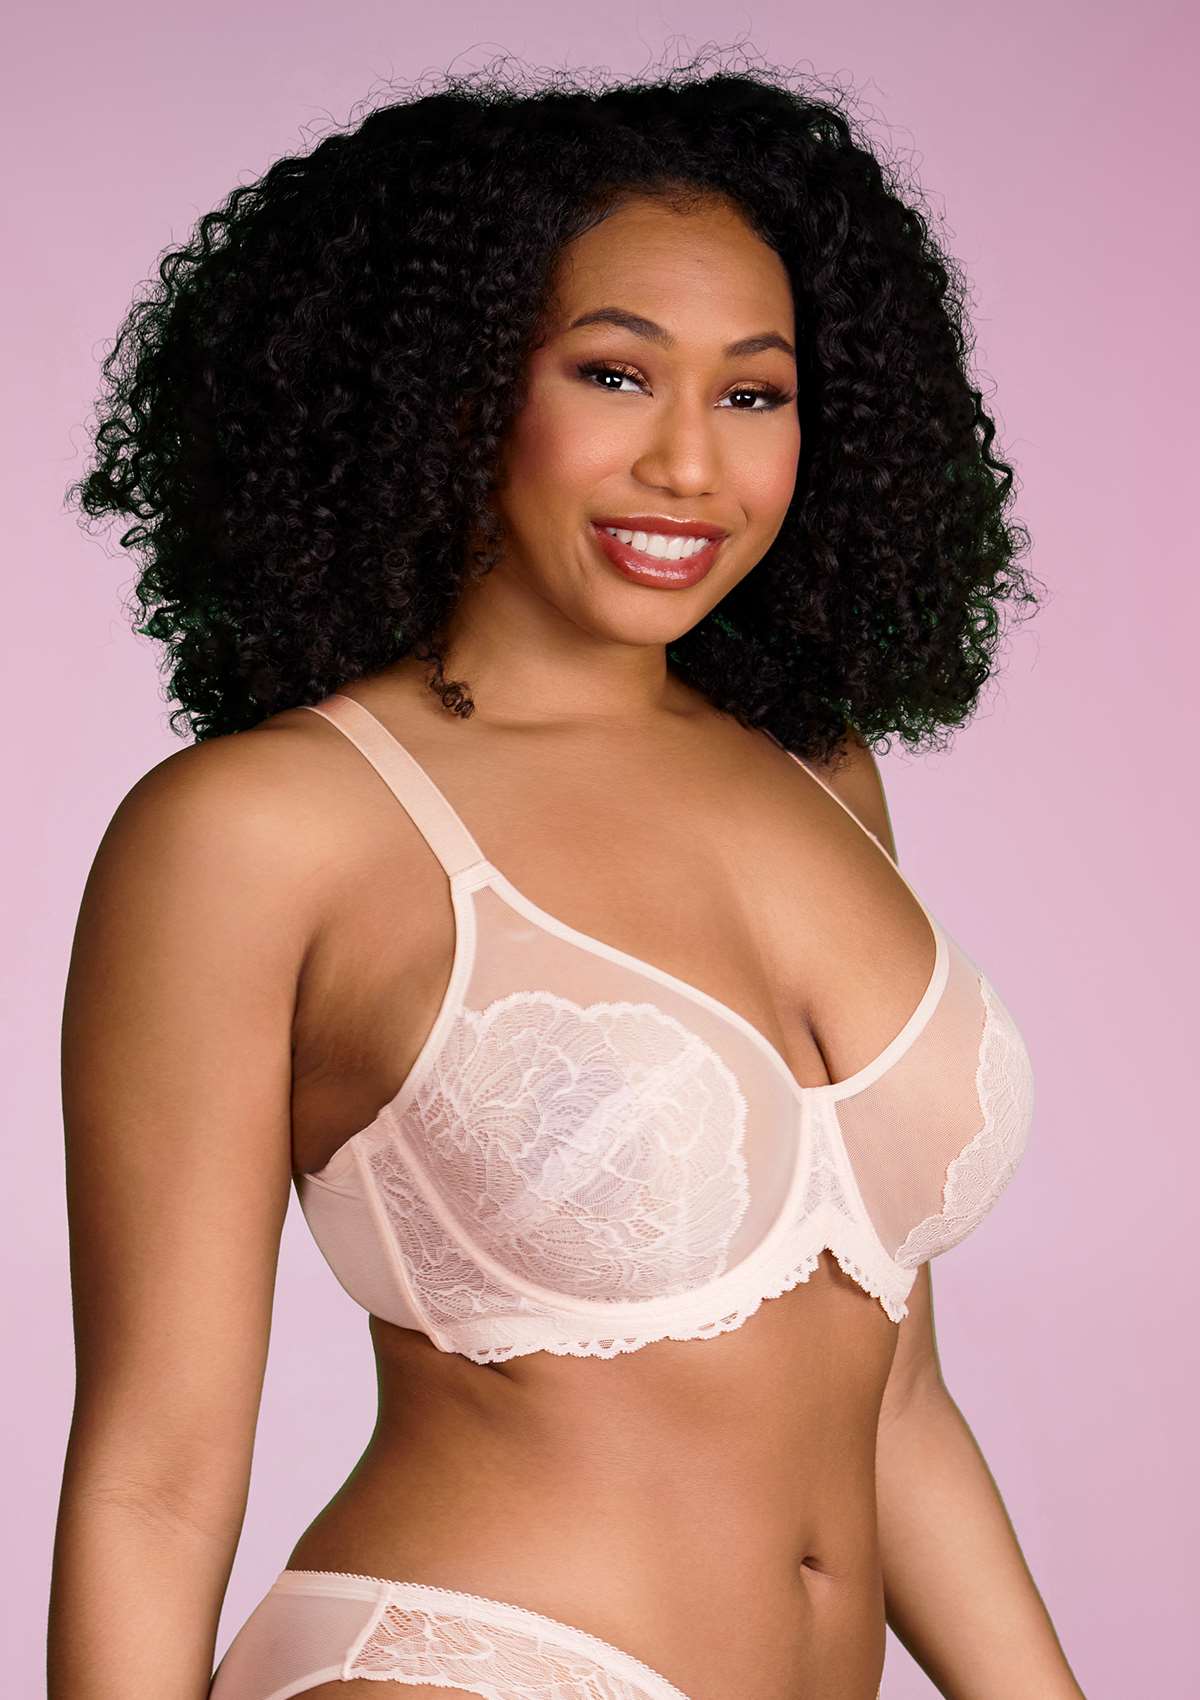 HSIA Blossom Sheer Lace Bra: Comfortable Underwire Bra For Big Busts - Dusty Peach / 38 / I